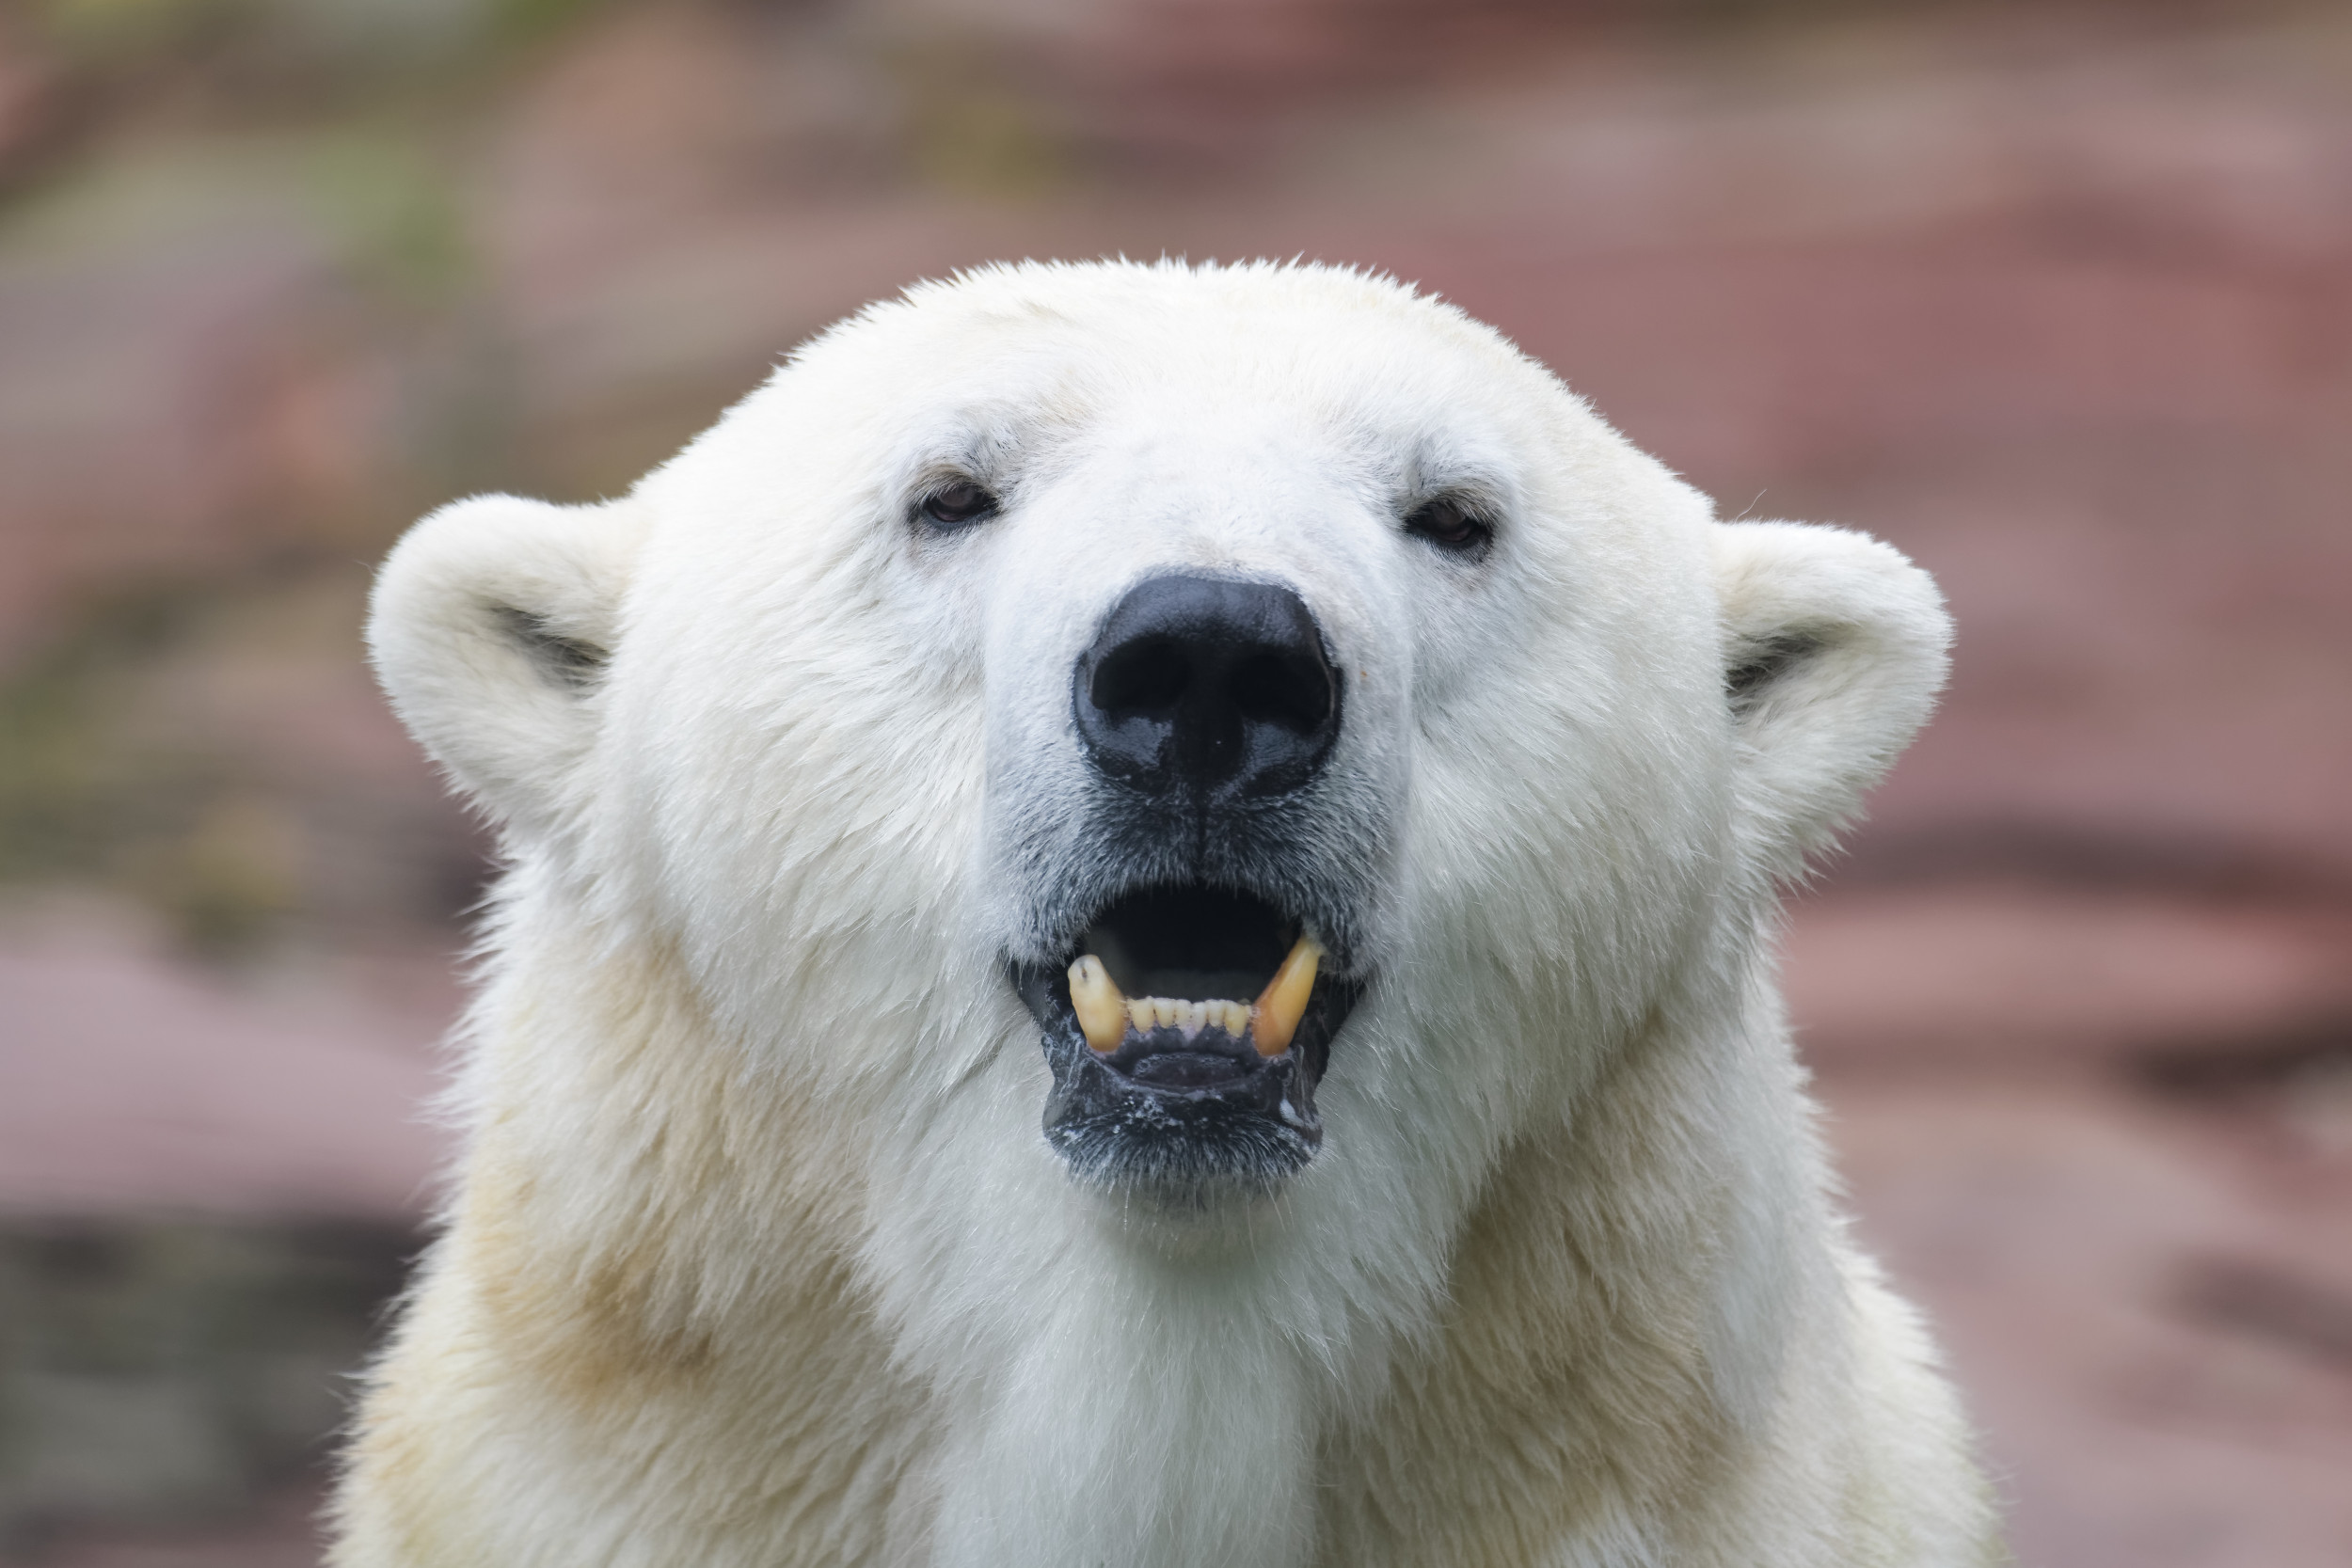 Polar Bear Attack on Woman and Boy Was Unusual and 'Extraordinarily Rare'